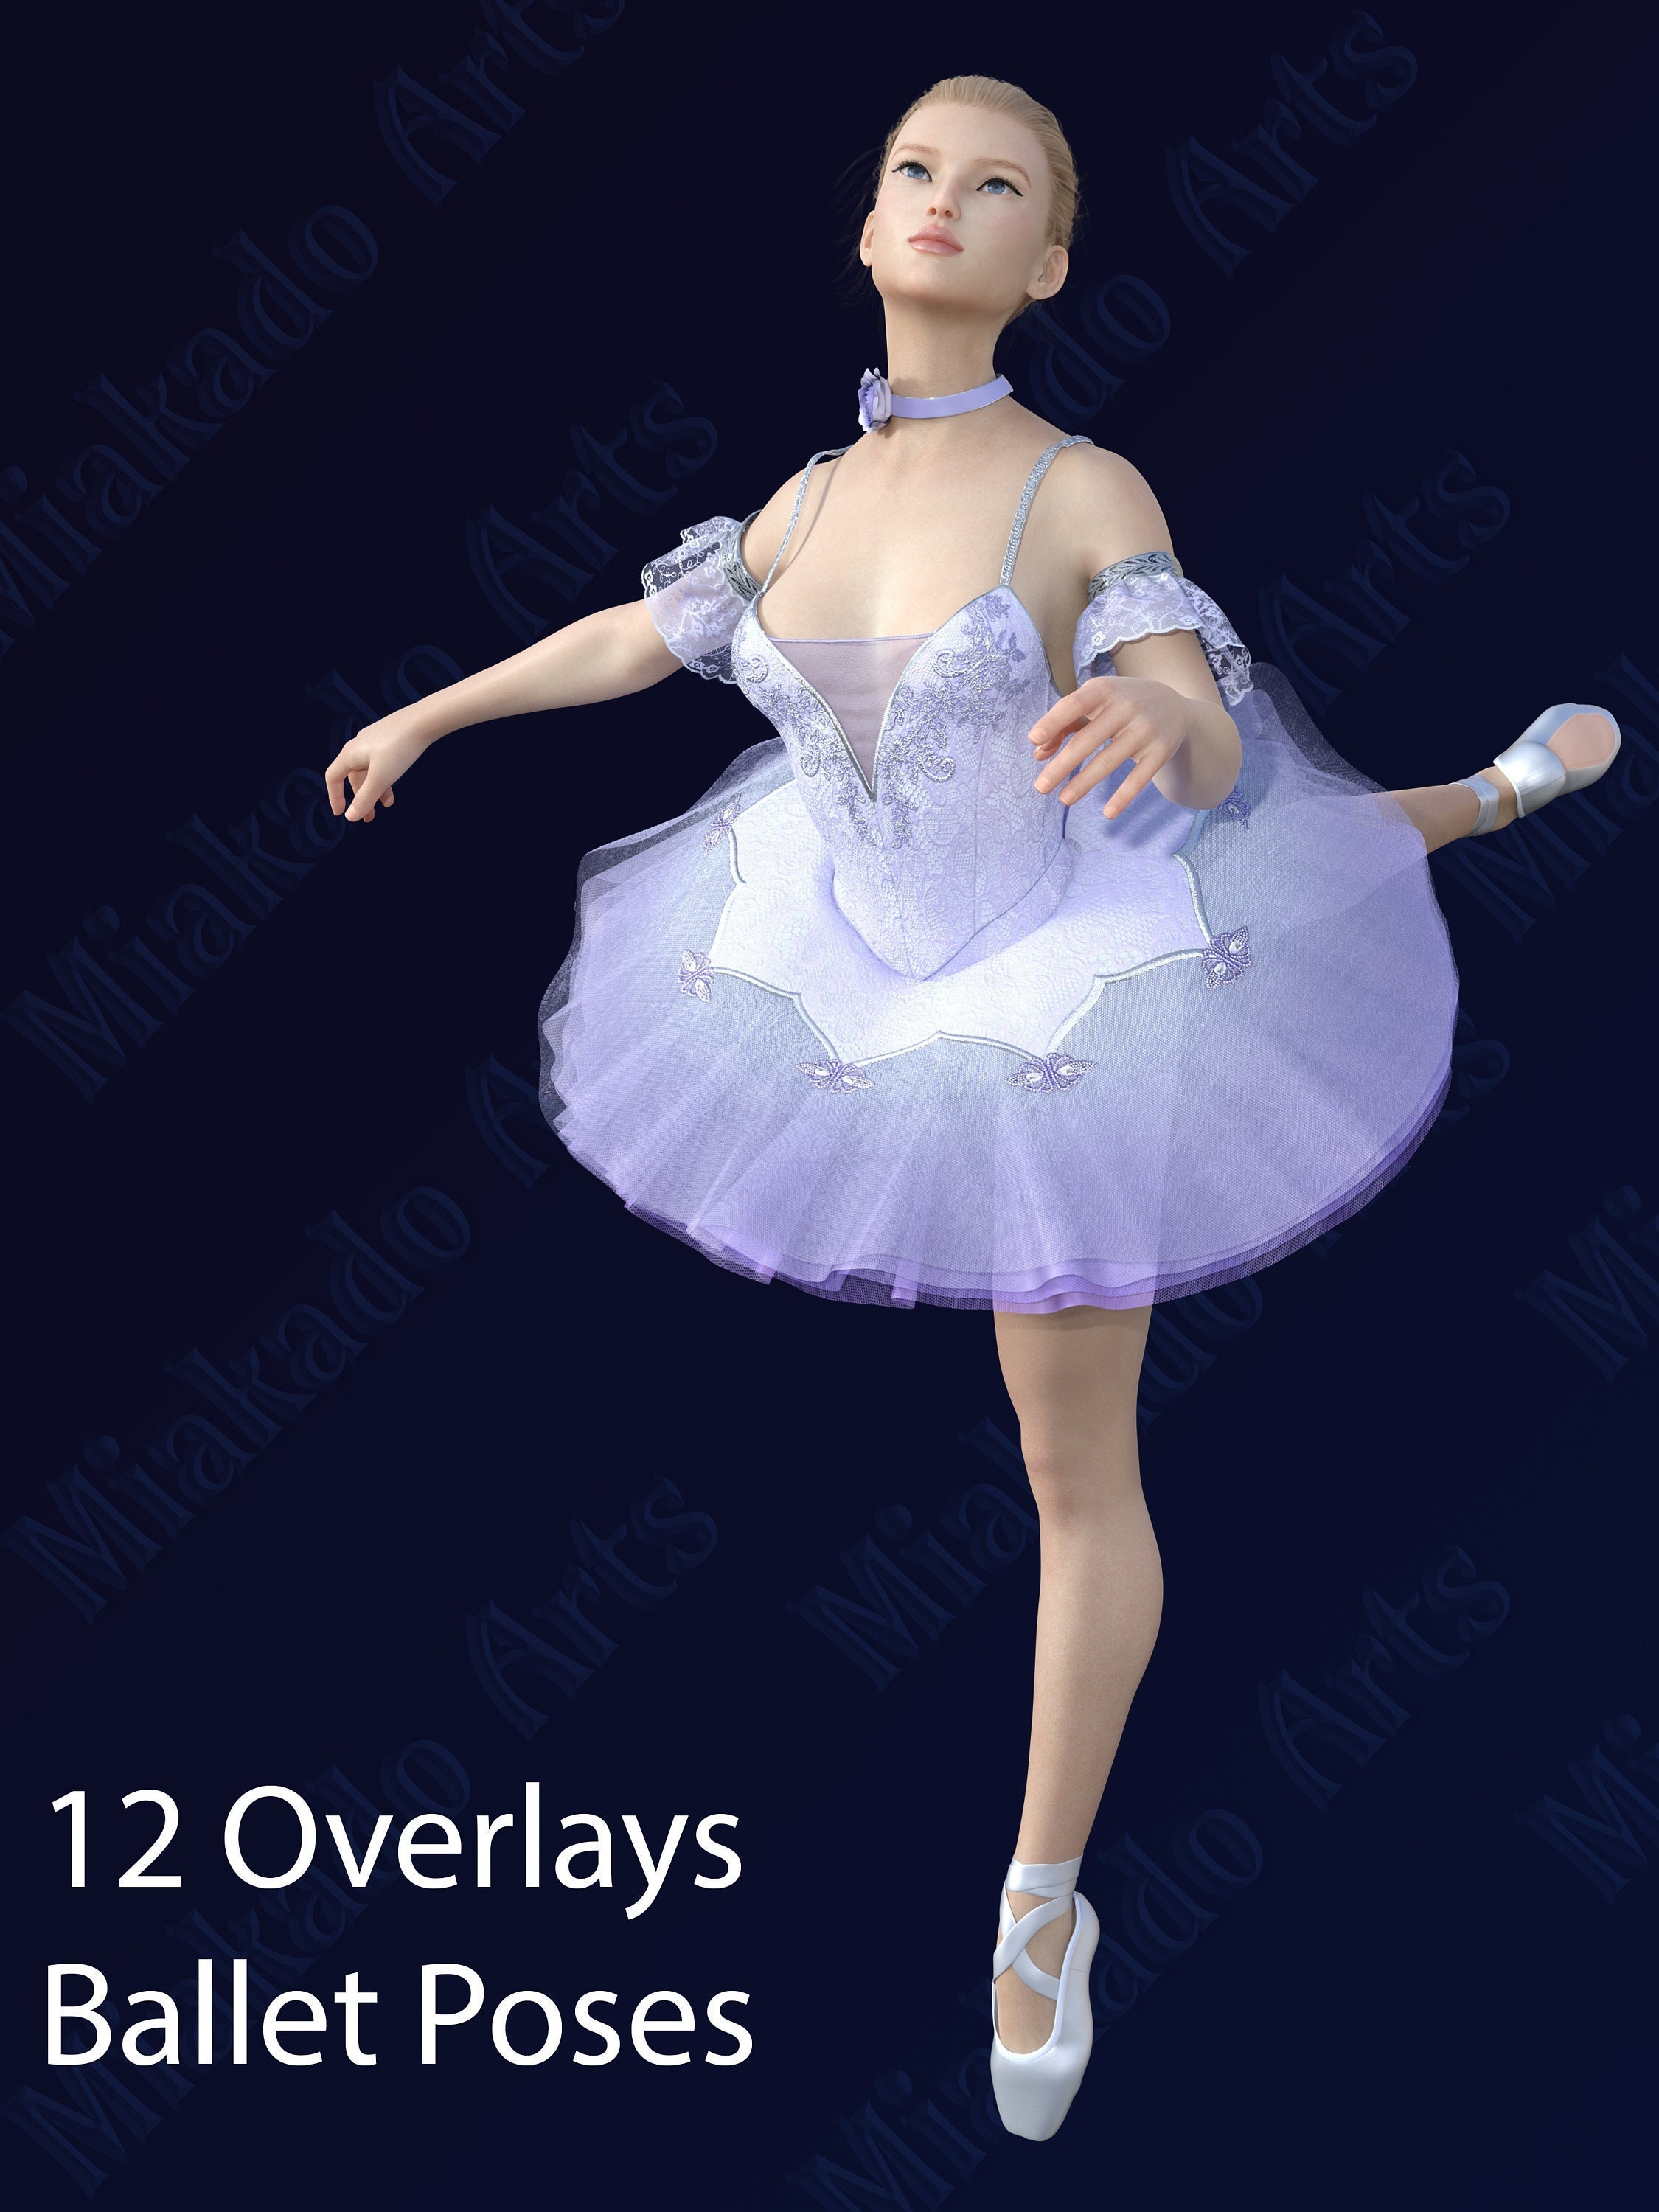 Stock: Poppy Seed Various Ballet Poses by ArtReferenceSource on DeviantArt